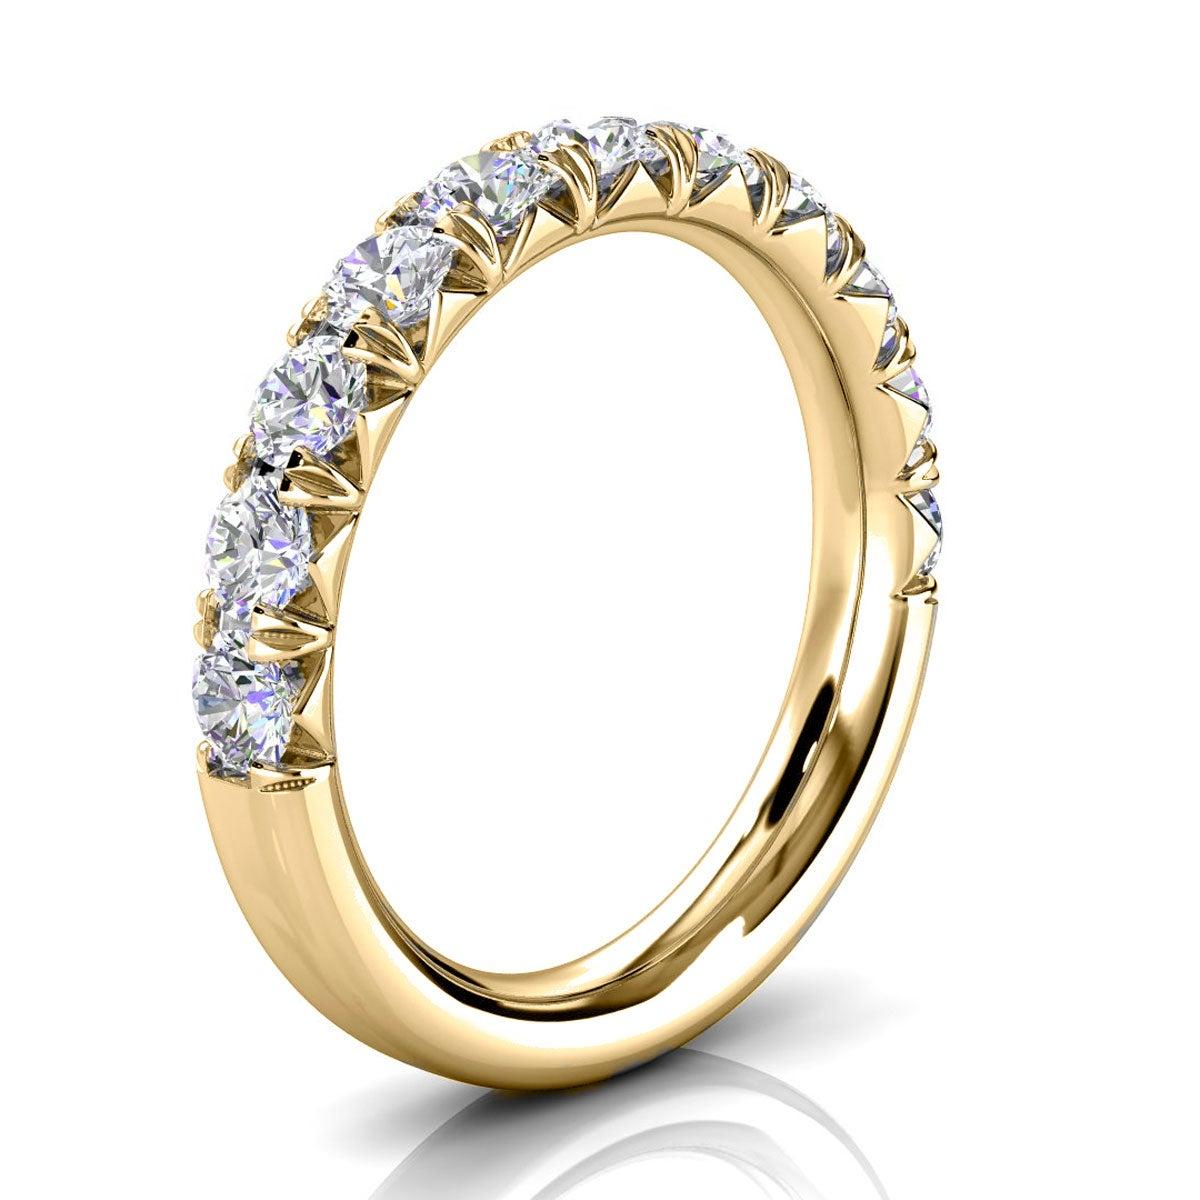 For Sale:  14k Yellow Gold Voyage French Pave Diamond Ring '1 Ct. Tw' 2